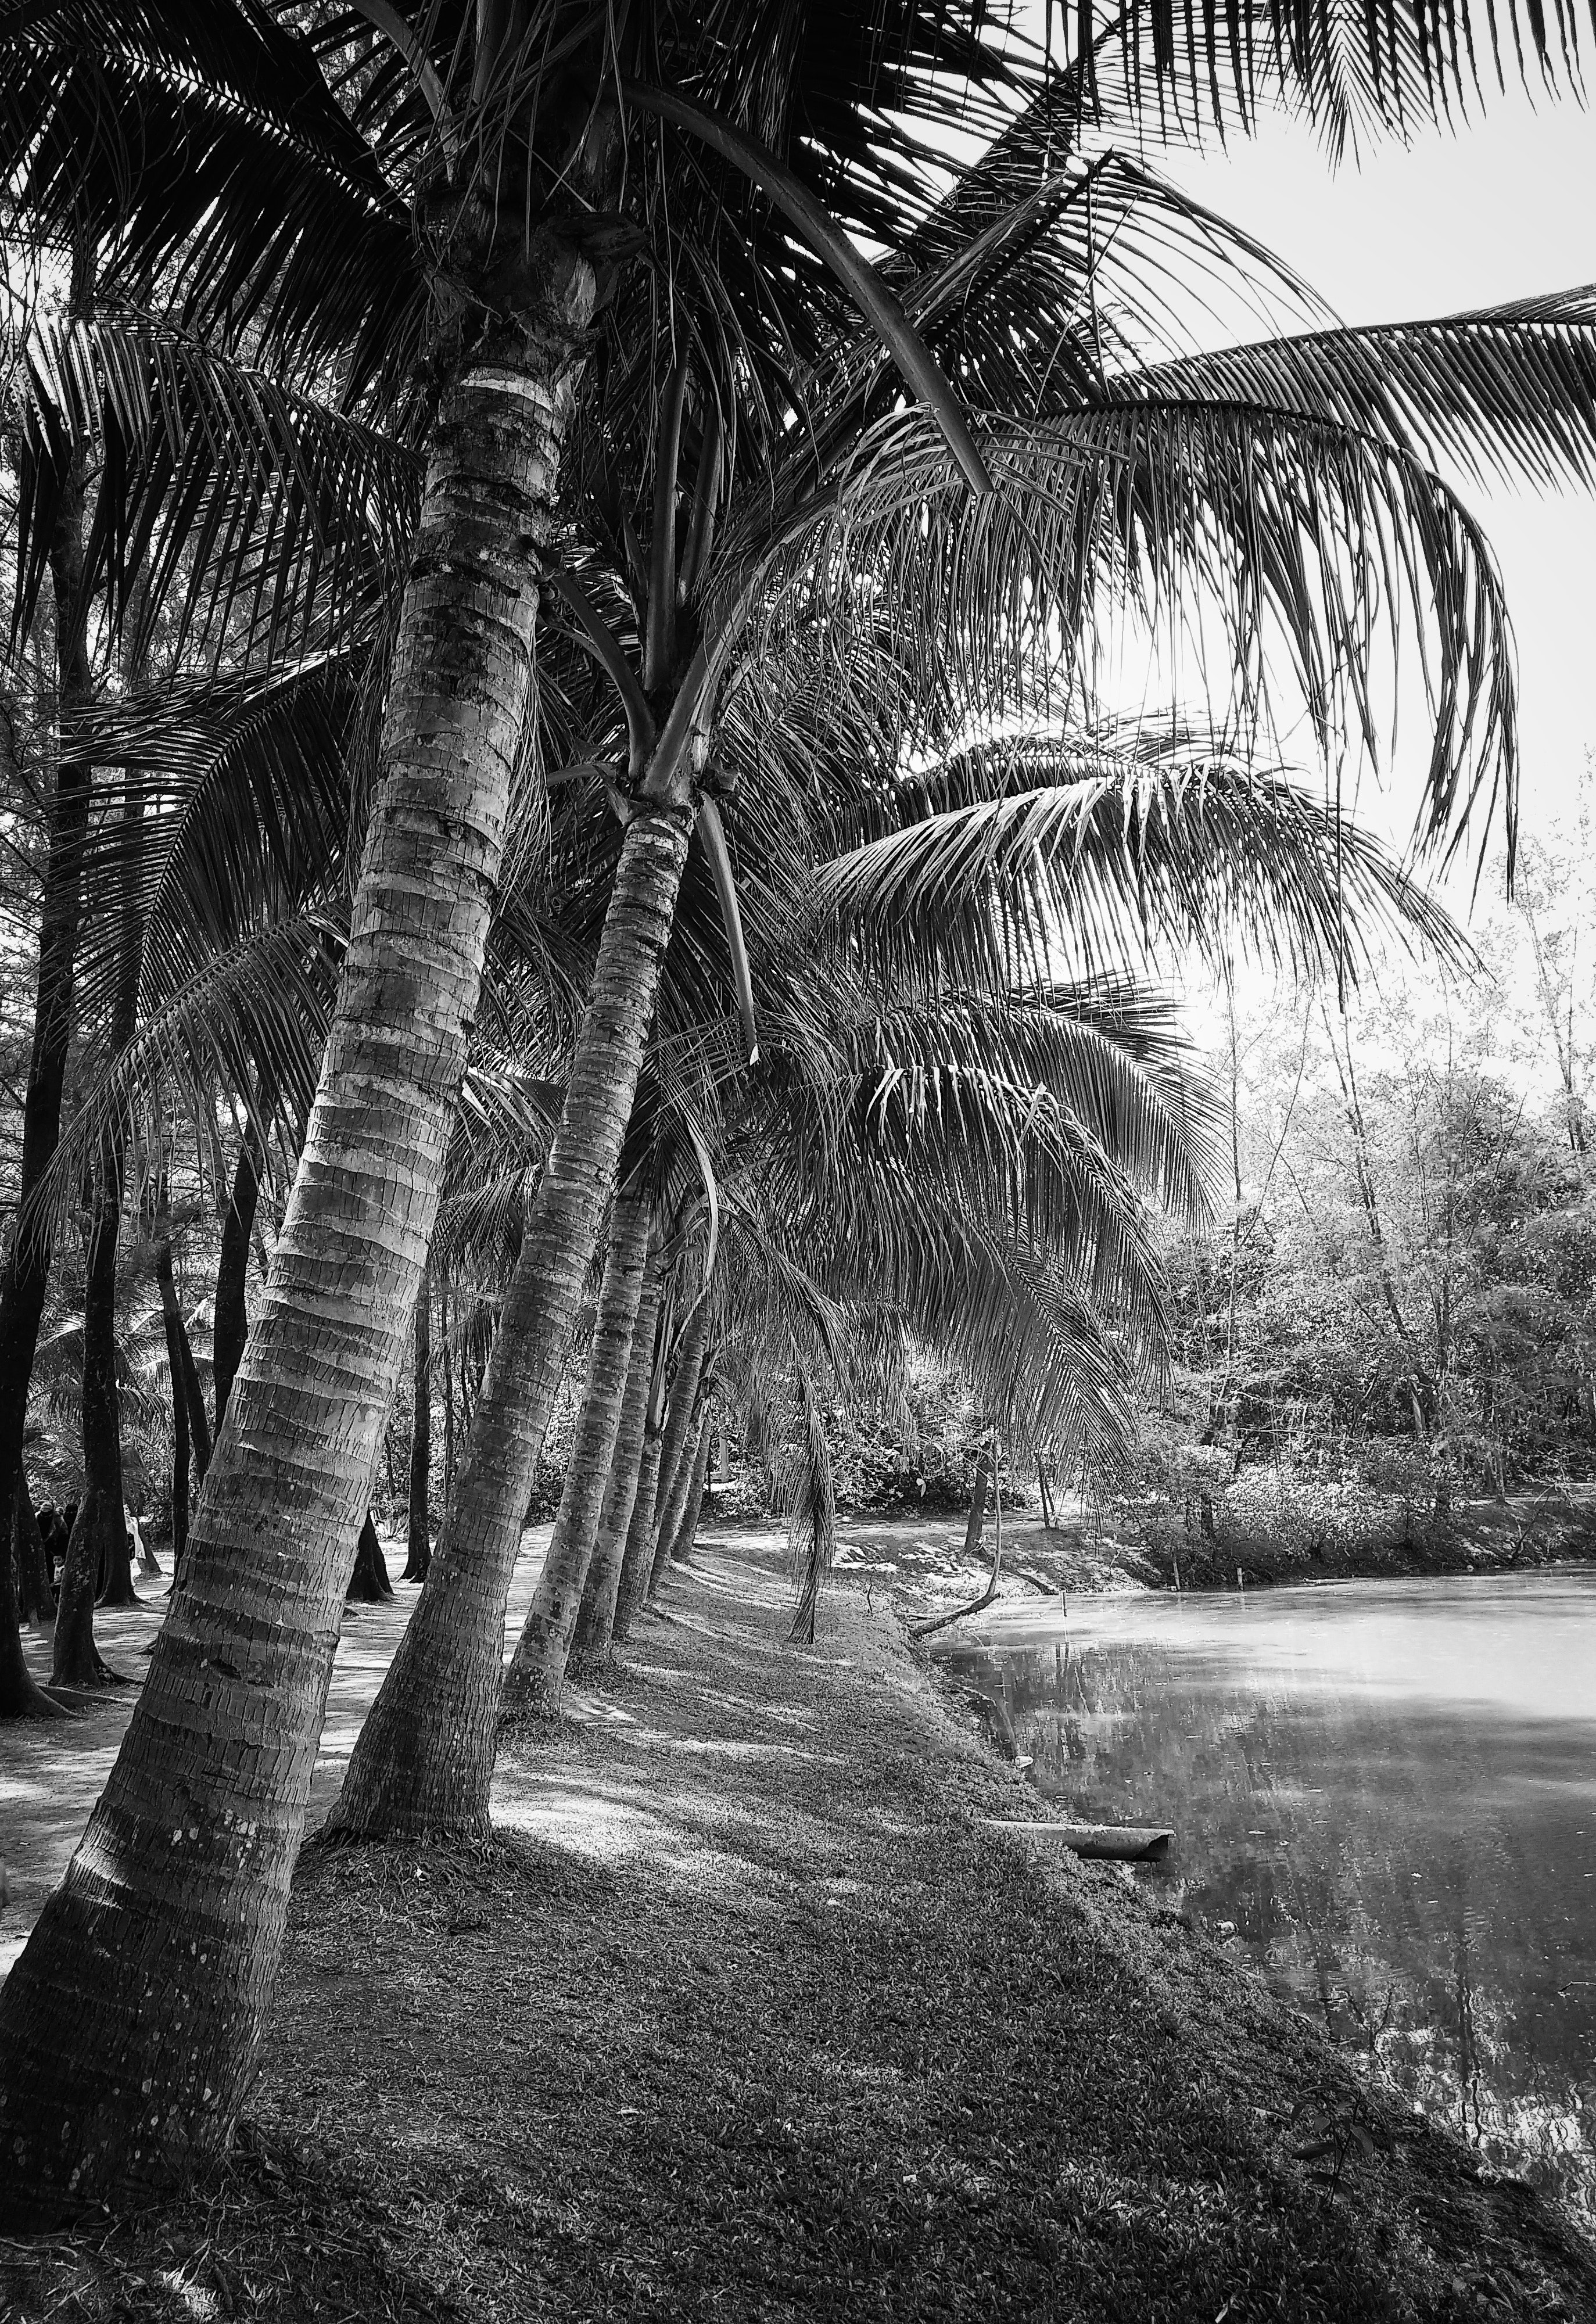 Grayscale photography of coconut trees beside body of water